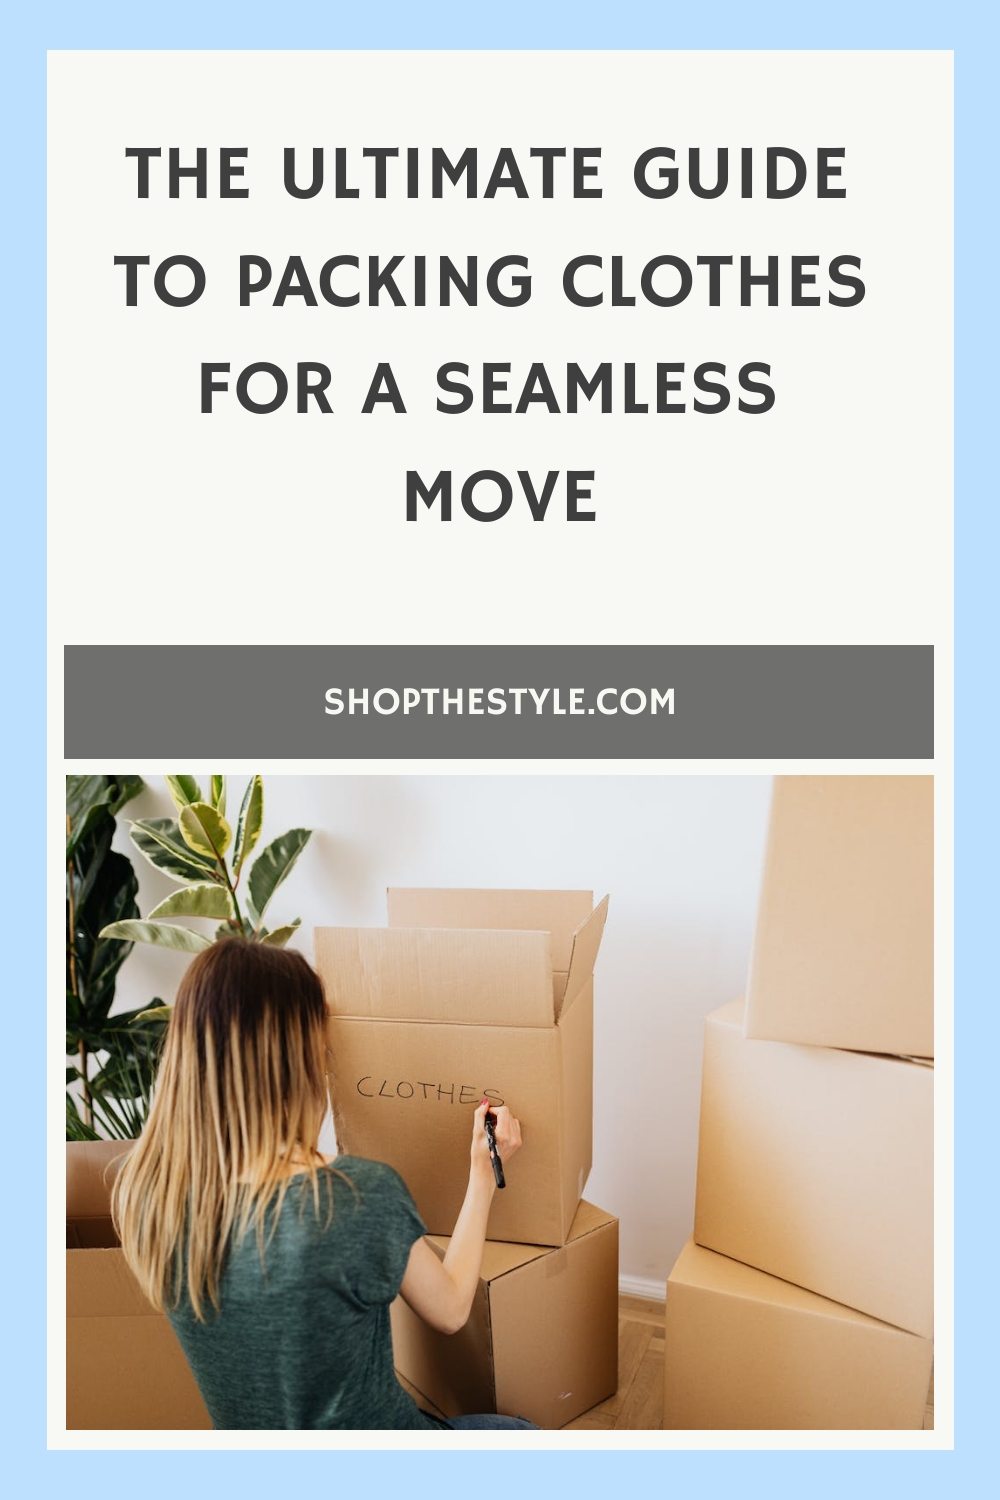 The Ultimate Guide to Packing Clothes for a Seamless Move